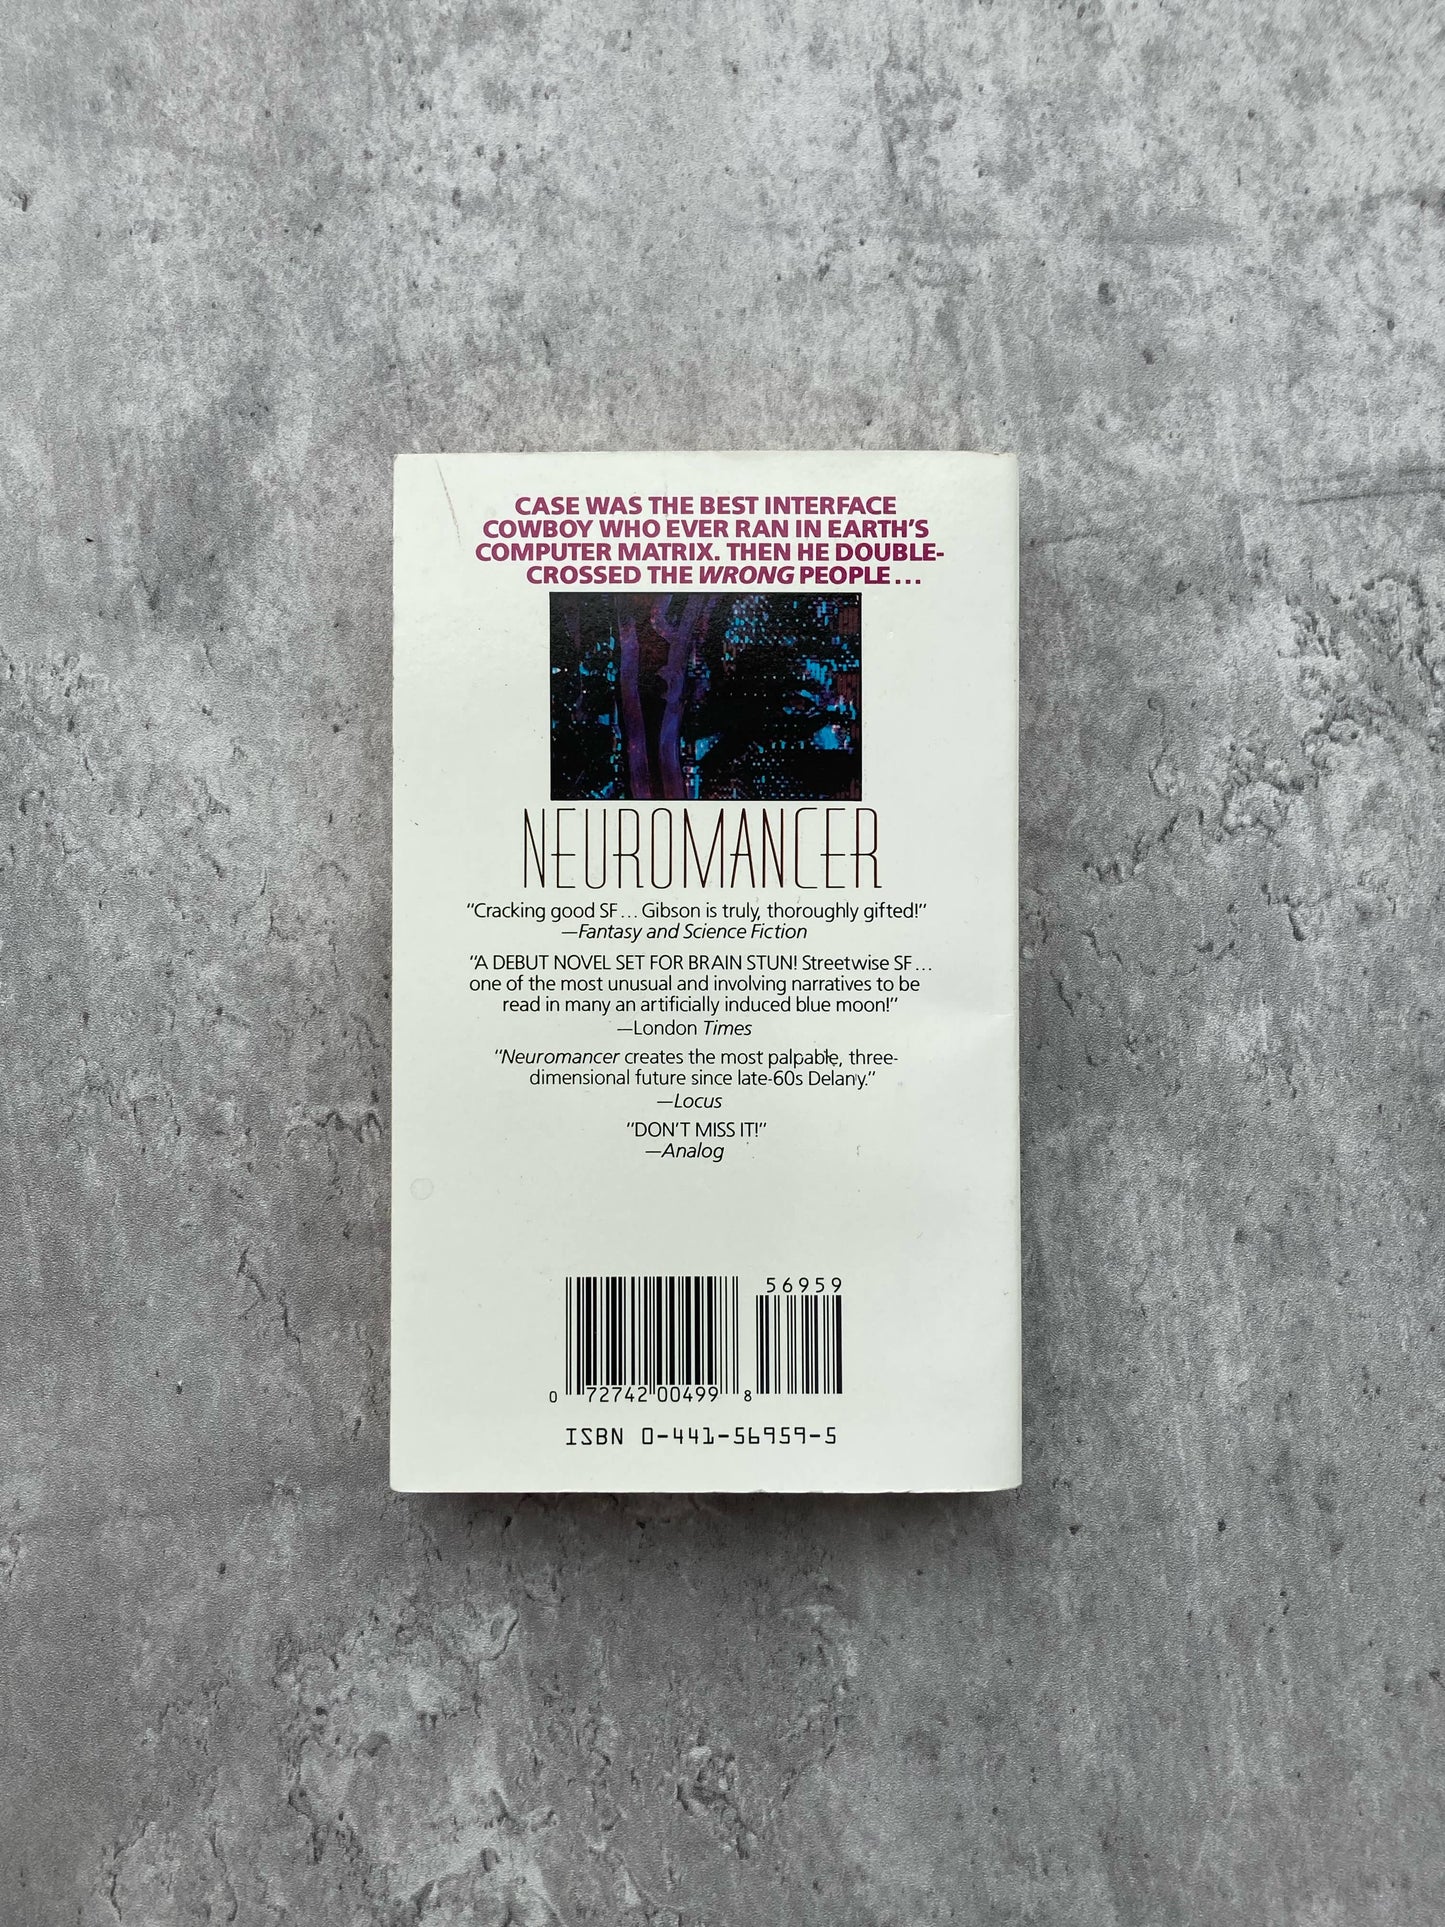 Neuromancer by William Gibson. Shop all new and used books online at The Stone Circle, the only online bookstore in Los Angeles, California.